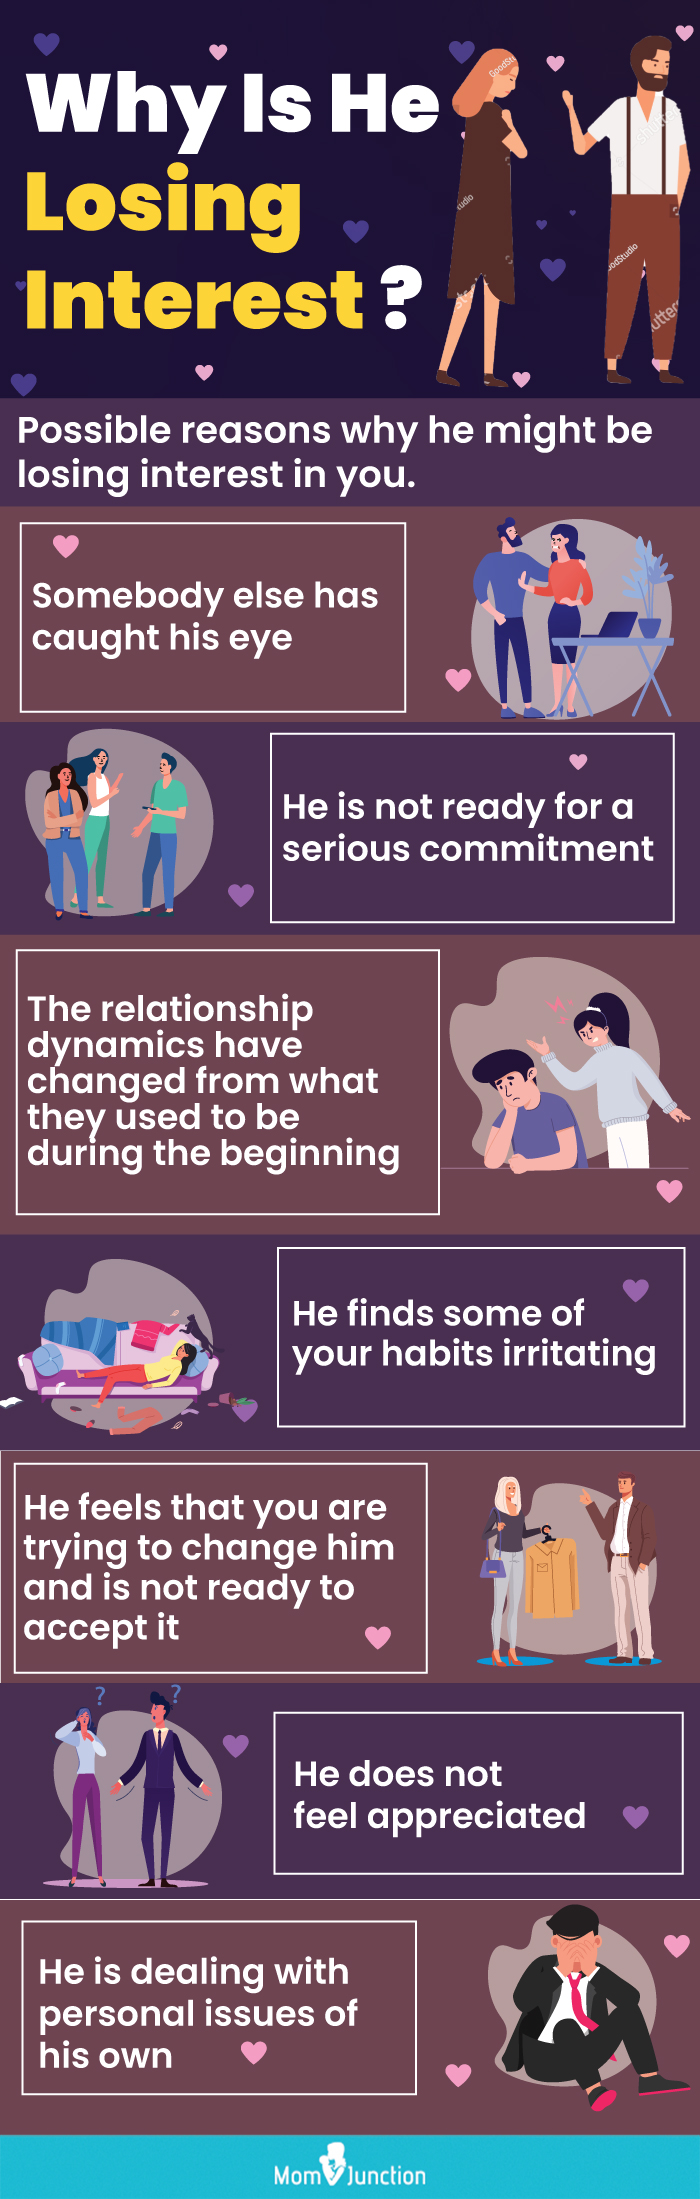 why is he losing interest [infographic]